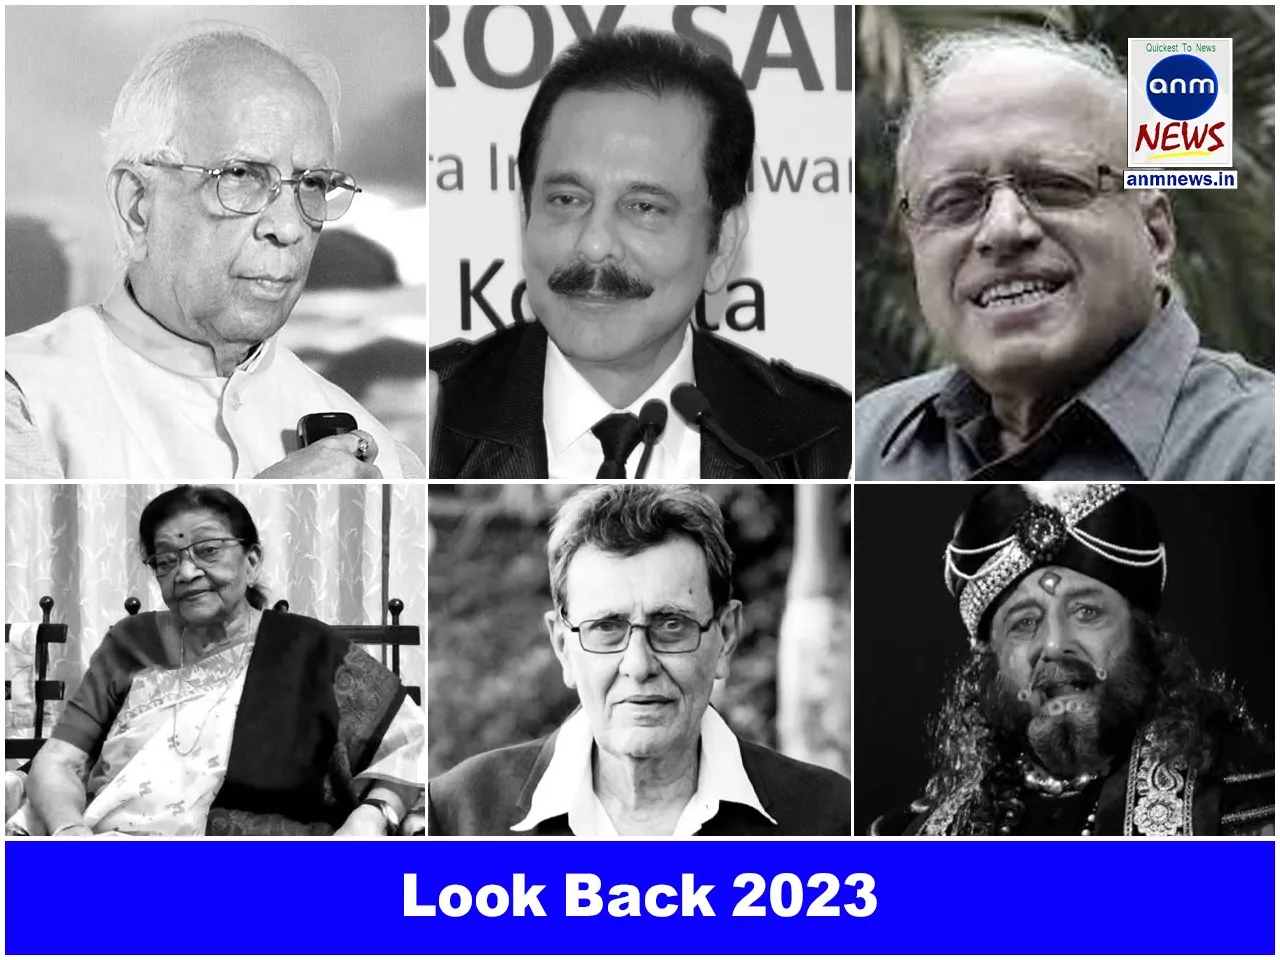 Look back 2023, all the stars we lost